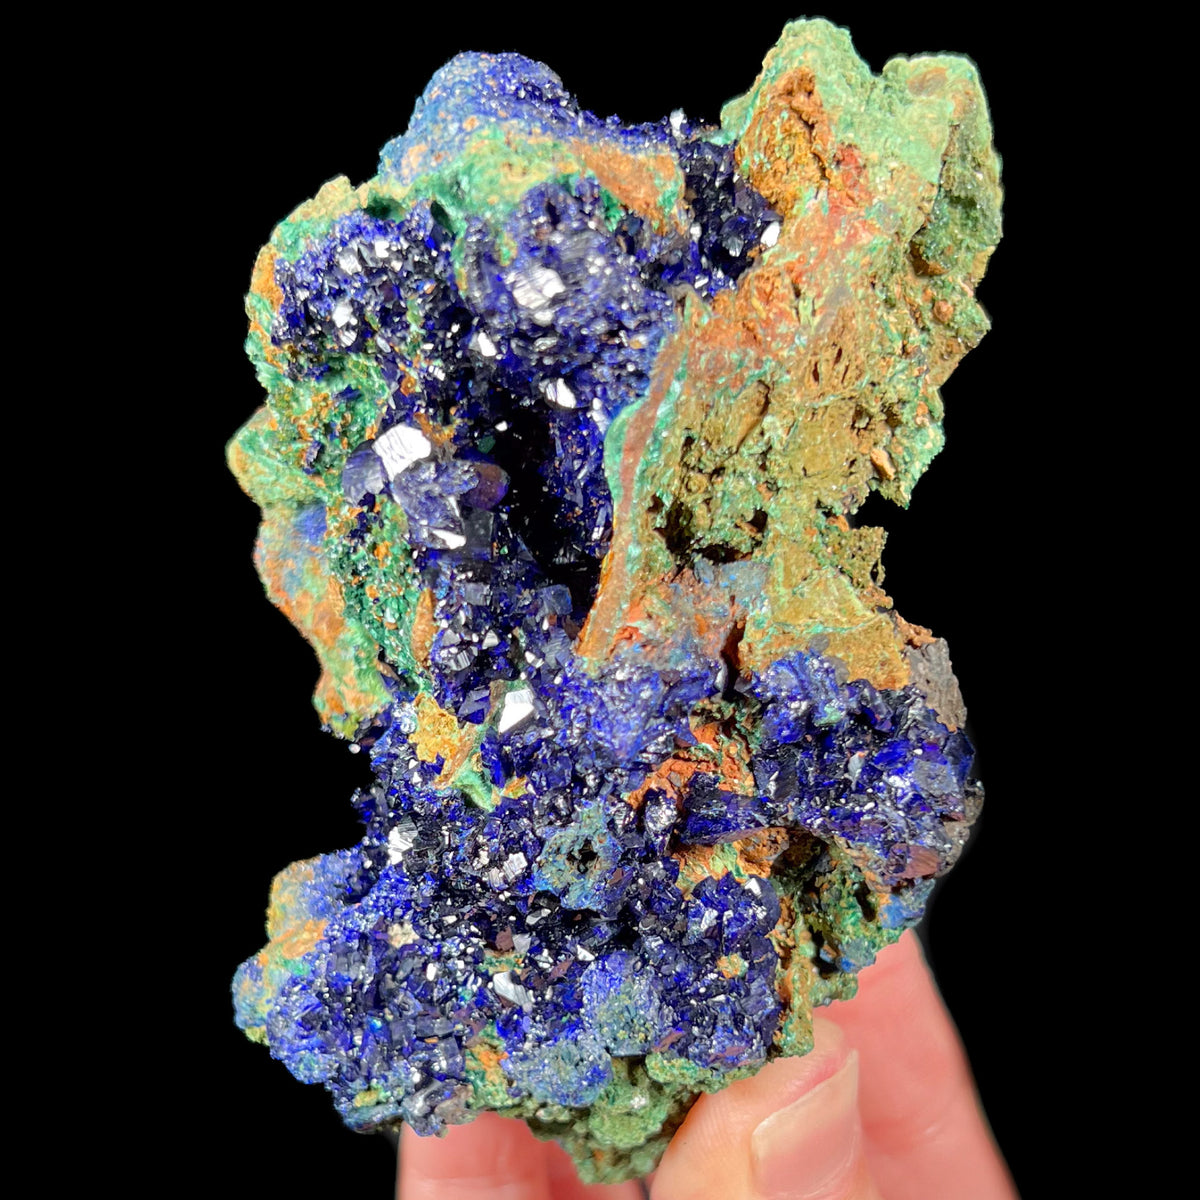 Azurite and Malachite Crystals on a mineral specimen